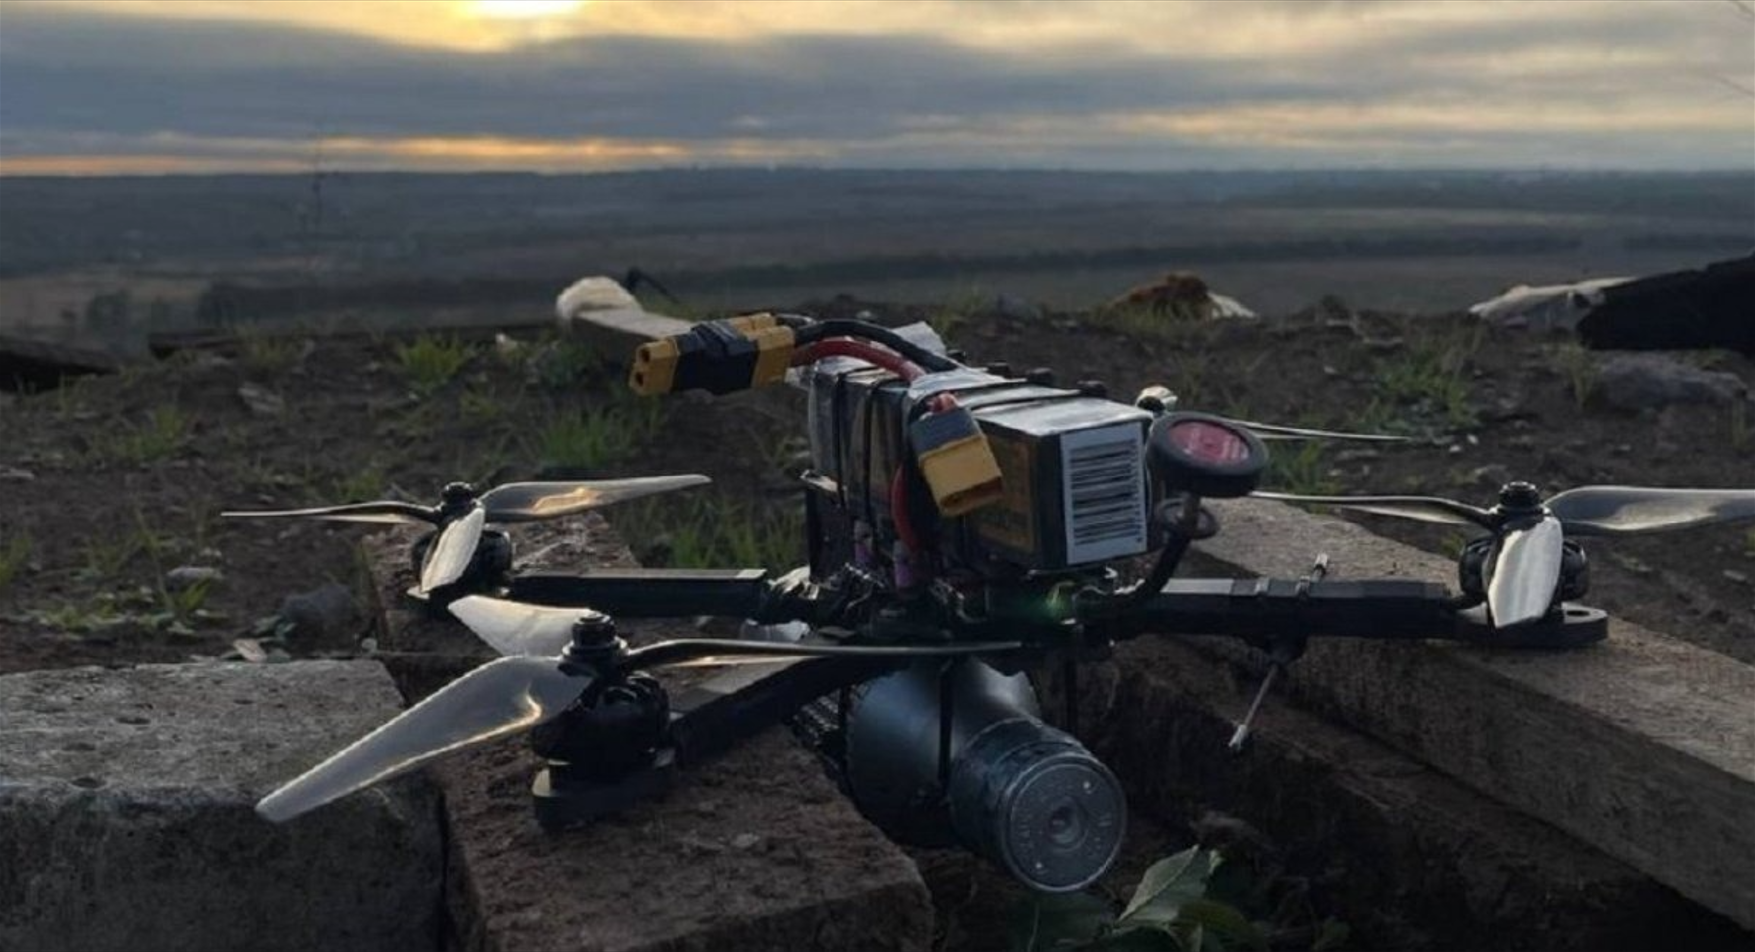 New threat: FPV Drones Adapt for Night-Time Operations - Militarnyi